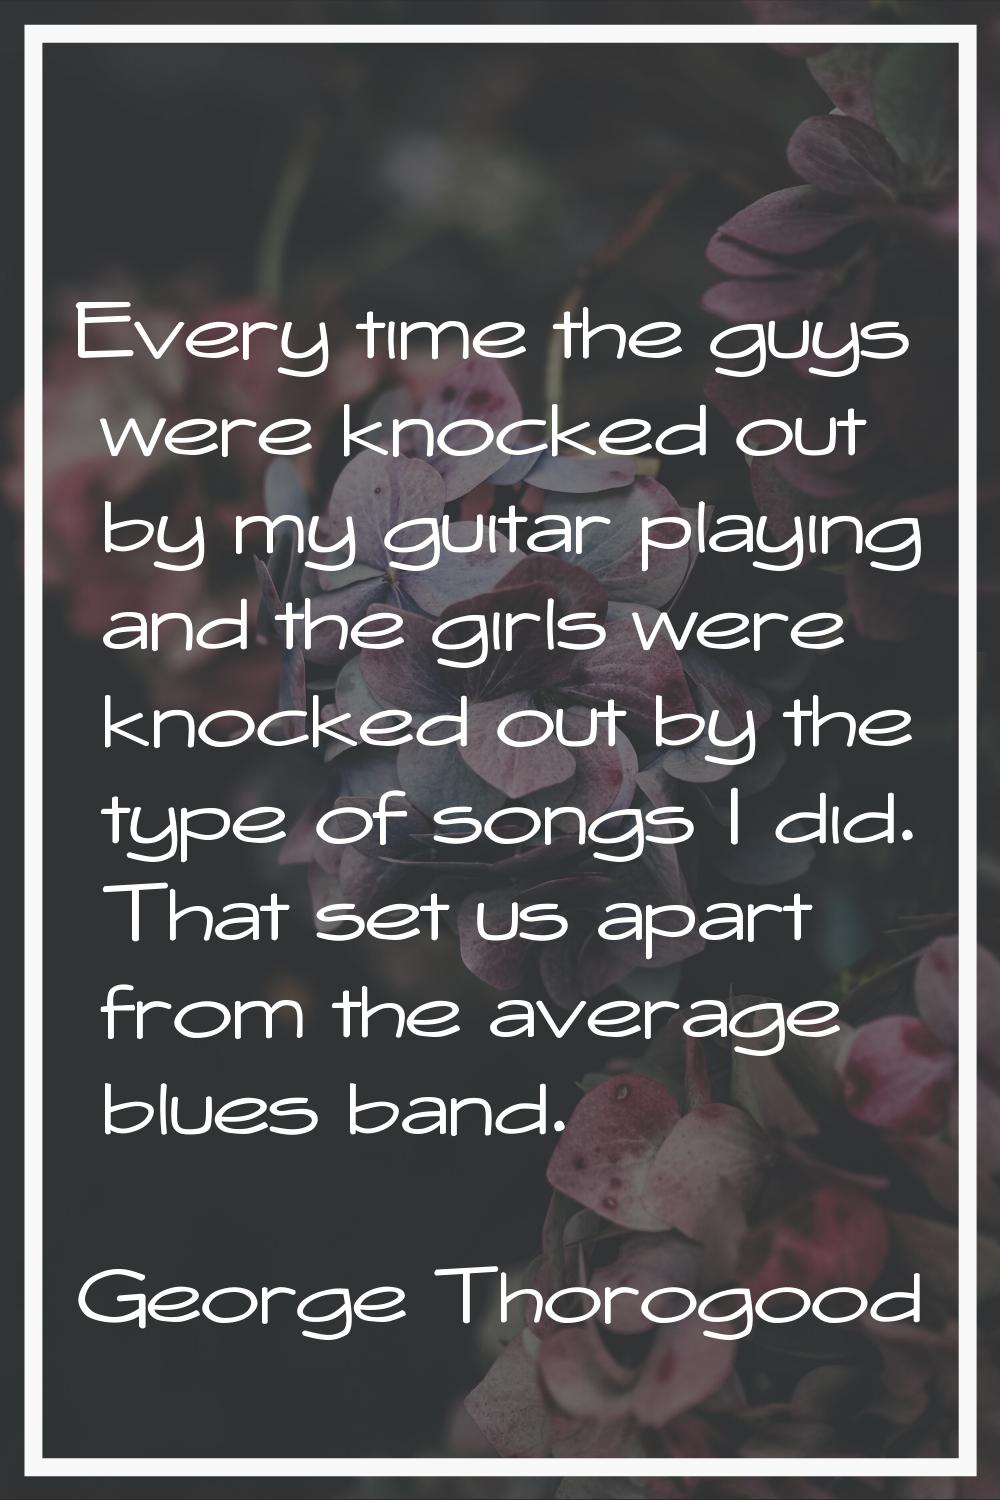 Every time the guys were knocked out by my guitar playing and the girls were knocked out by the typ